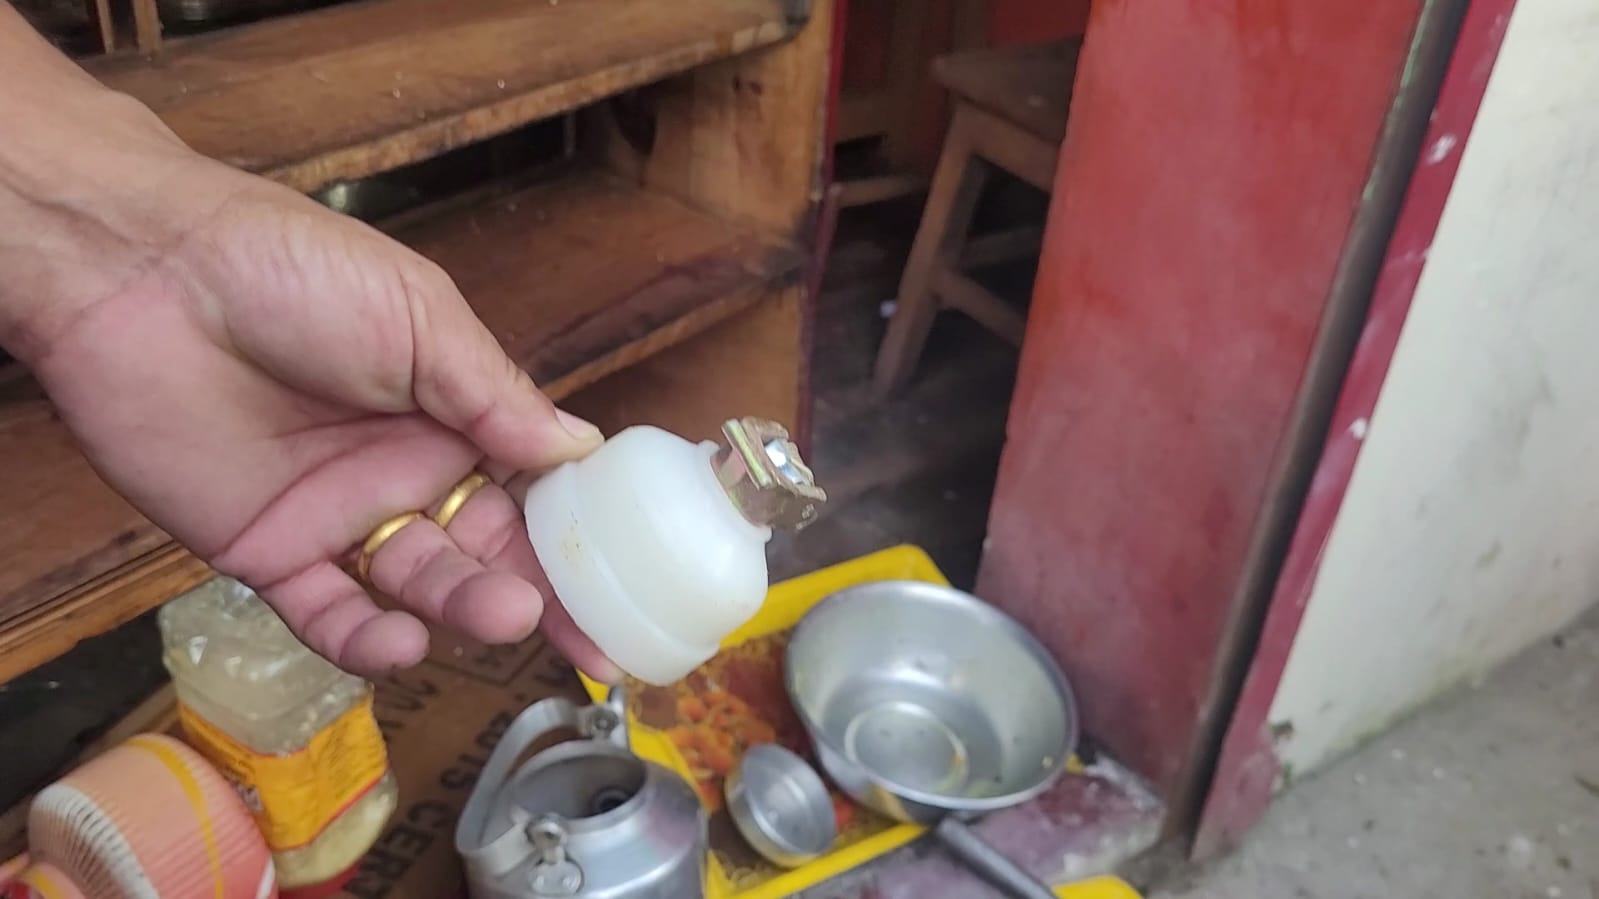 HYC condemns police action of hurling a stun grenade in a tea stall